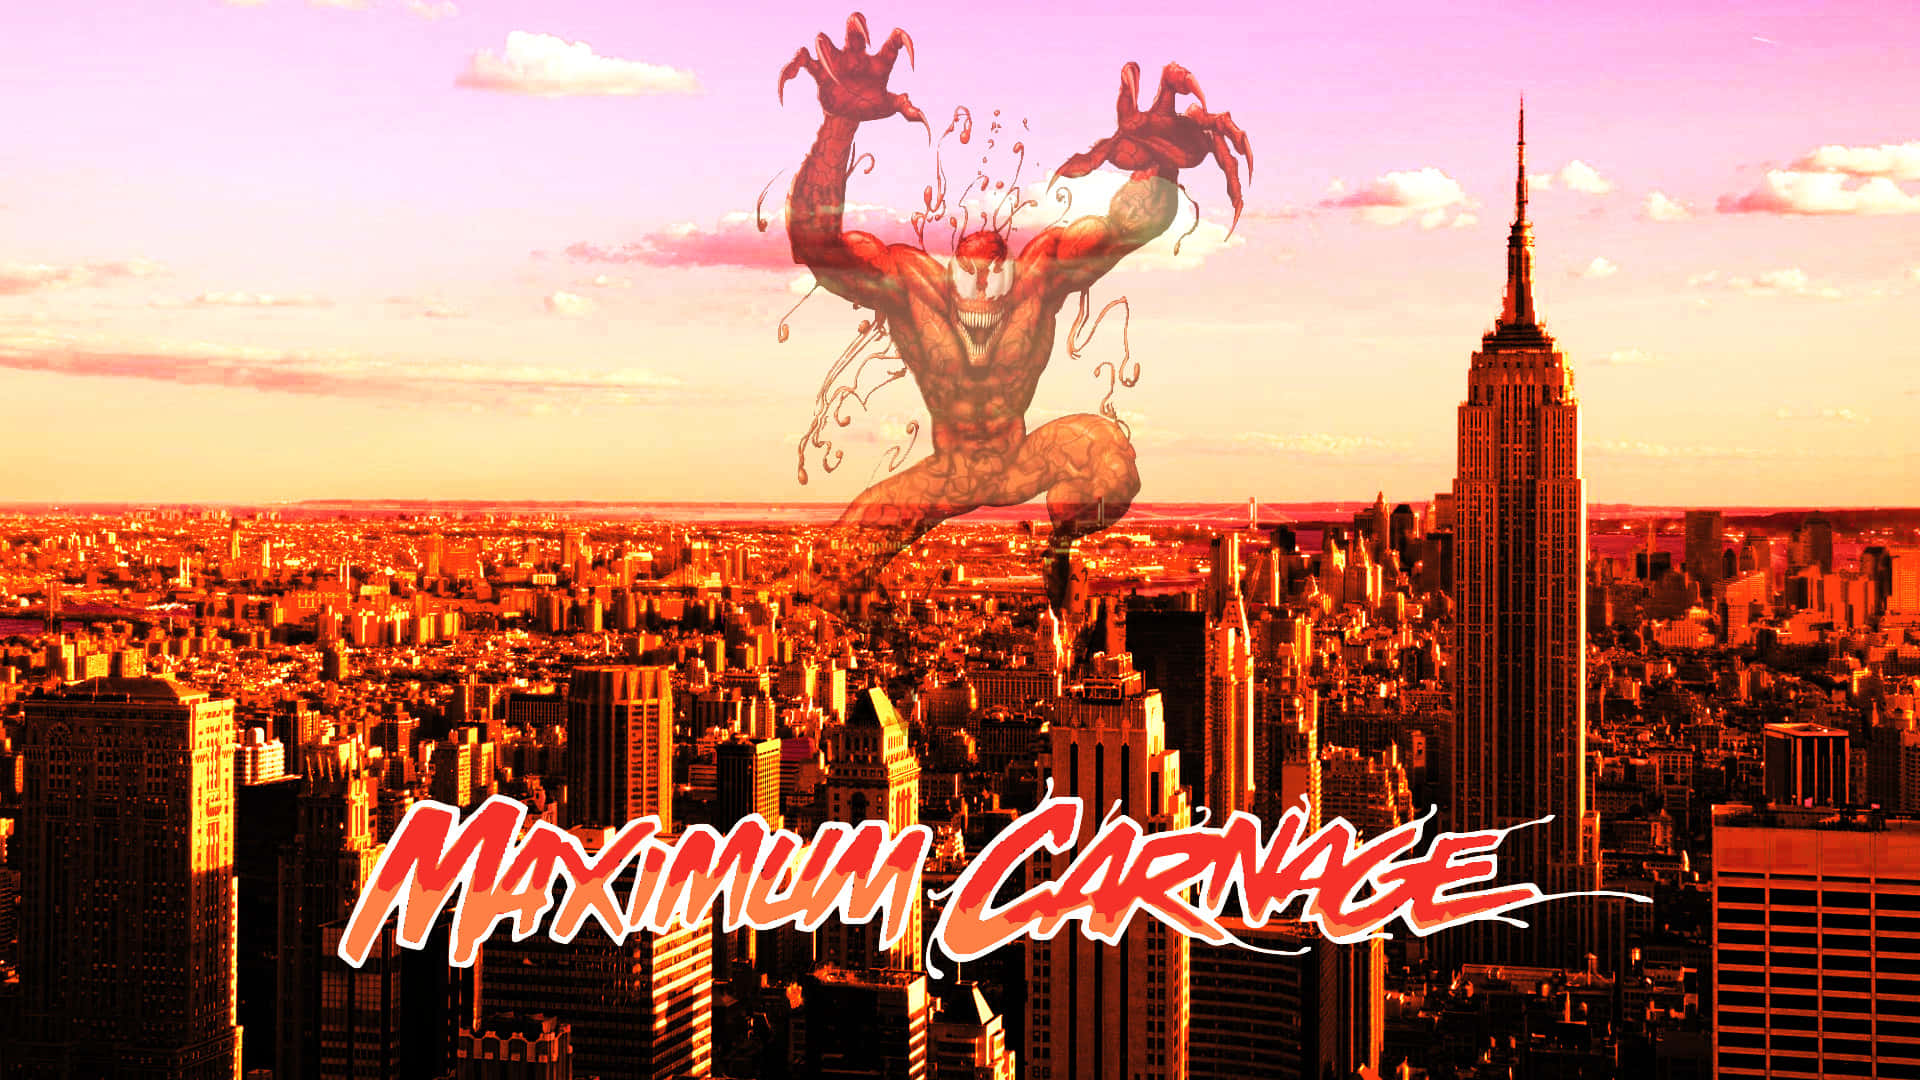 Spider-Man and Venom team up against their deadliest foes in Maximum Carnage. Wallpaper